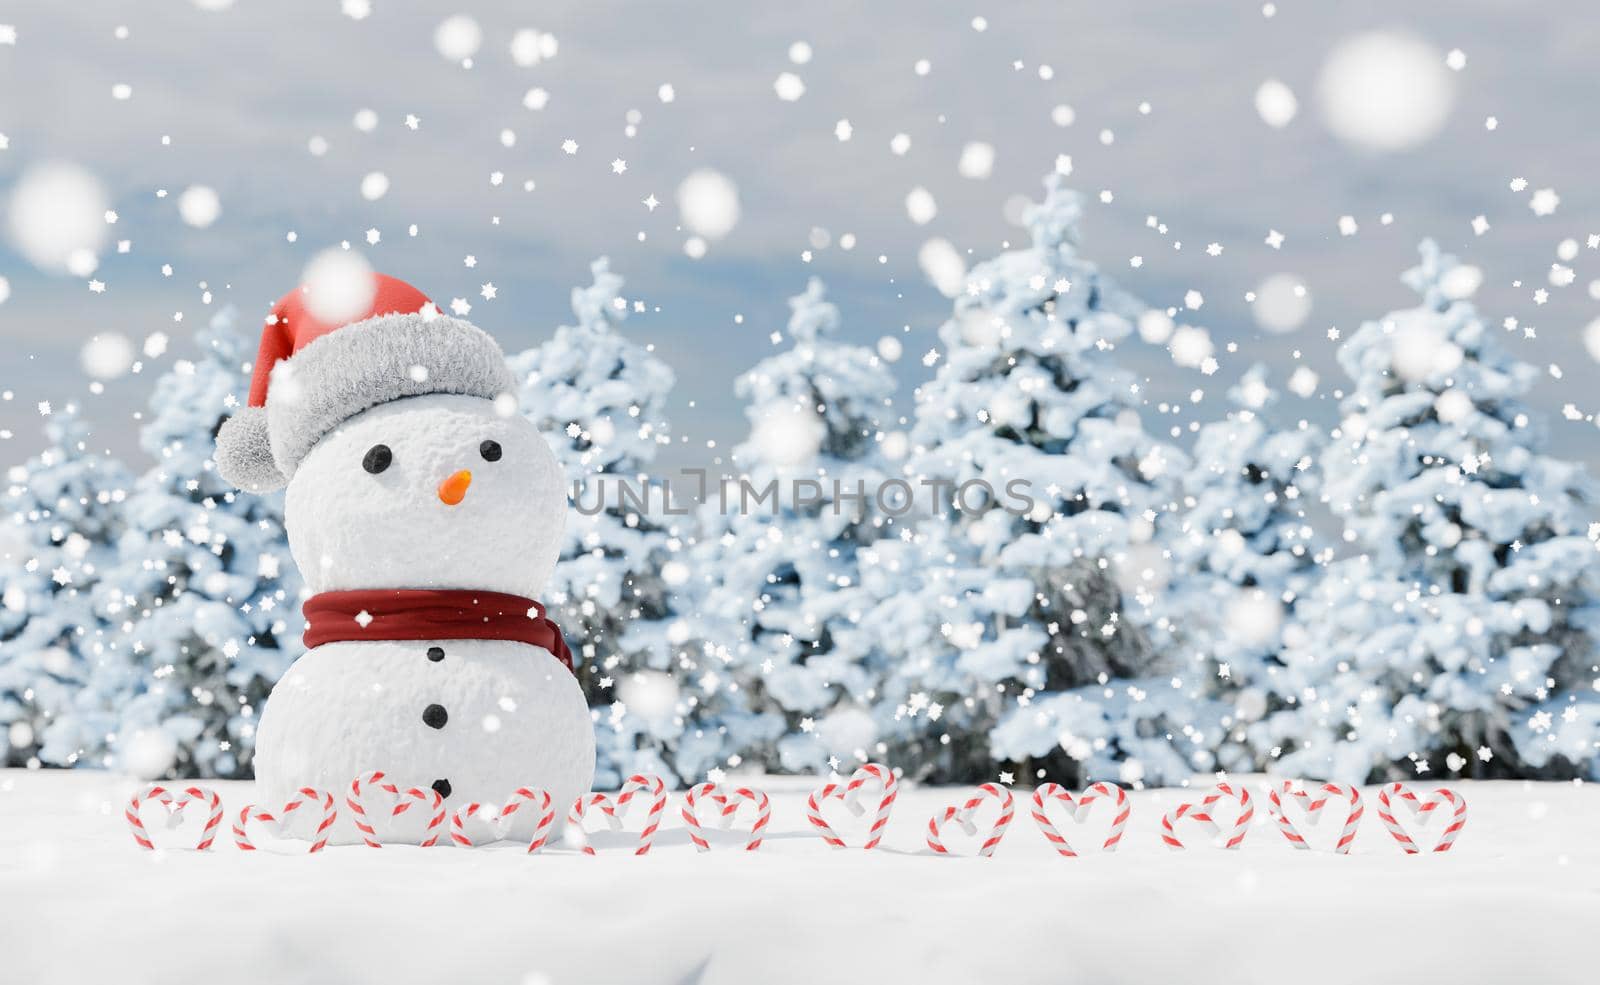 snowman with candy canes in a snowy landscape by asolano